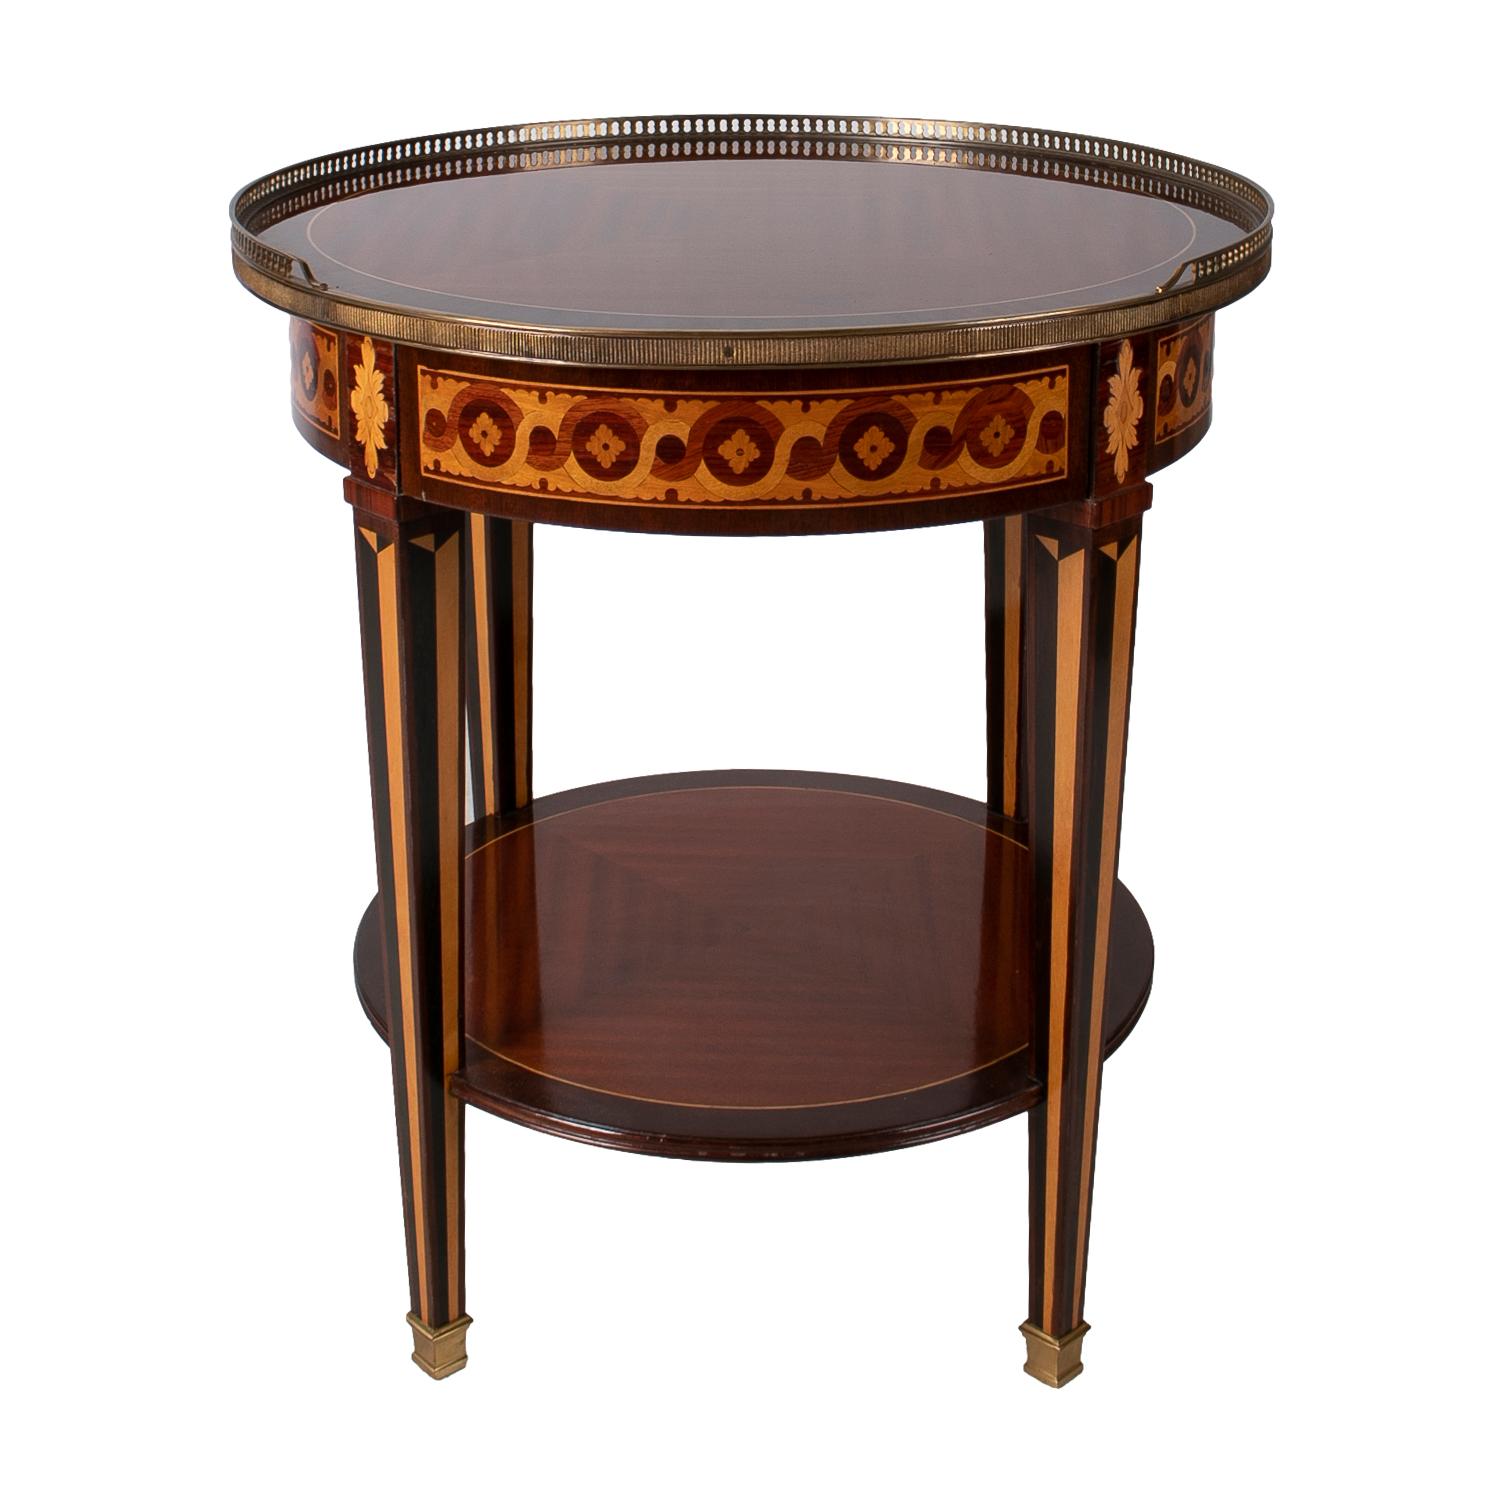 1980s French mahogany round side table with bronze decorations and inlays.